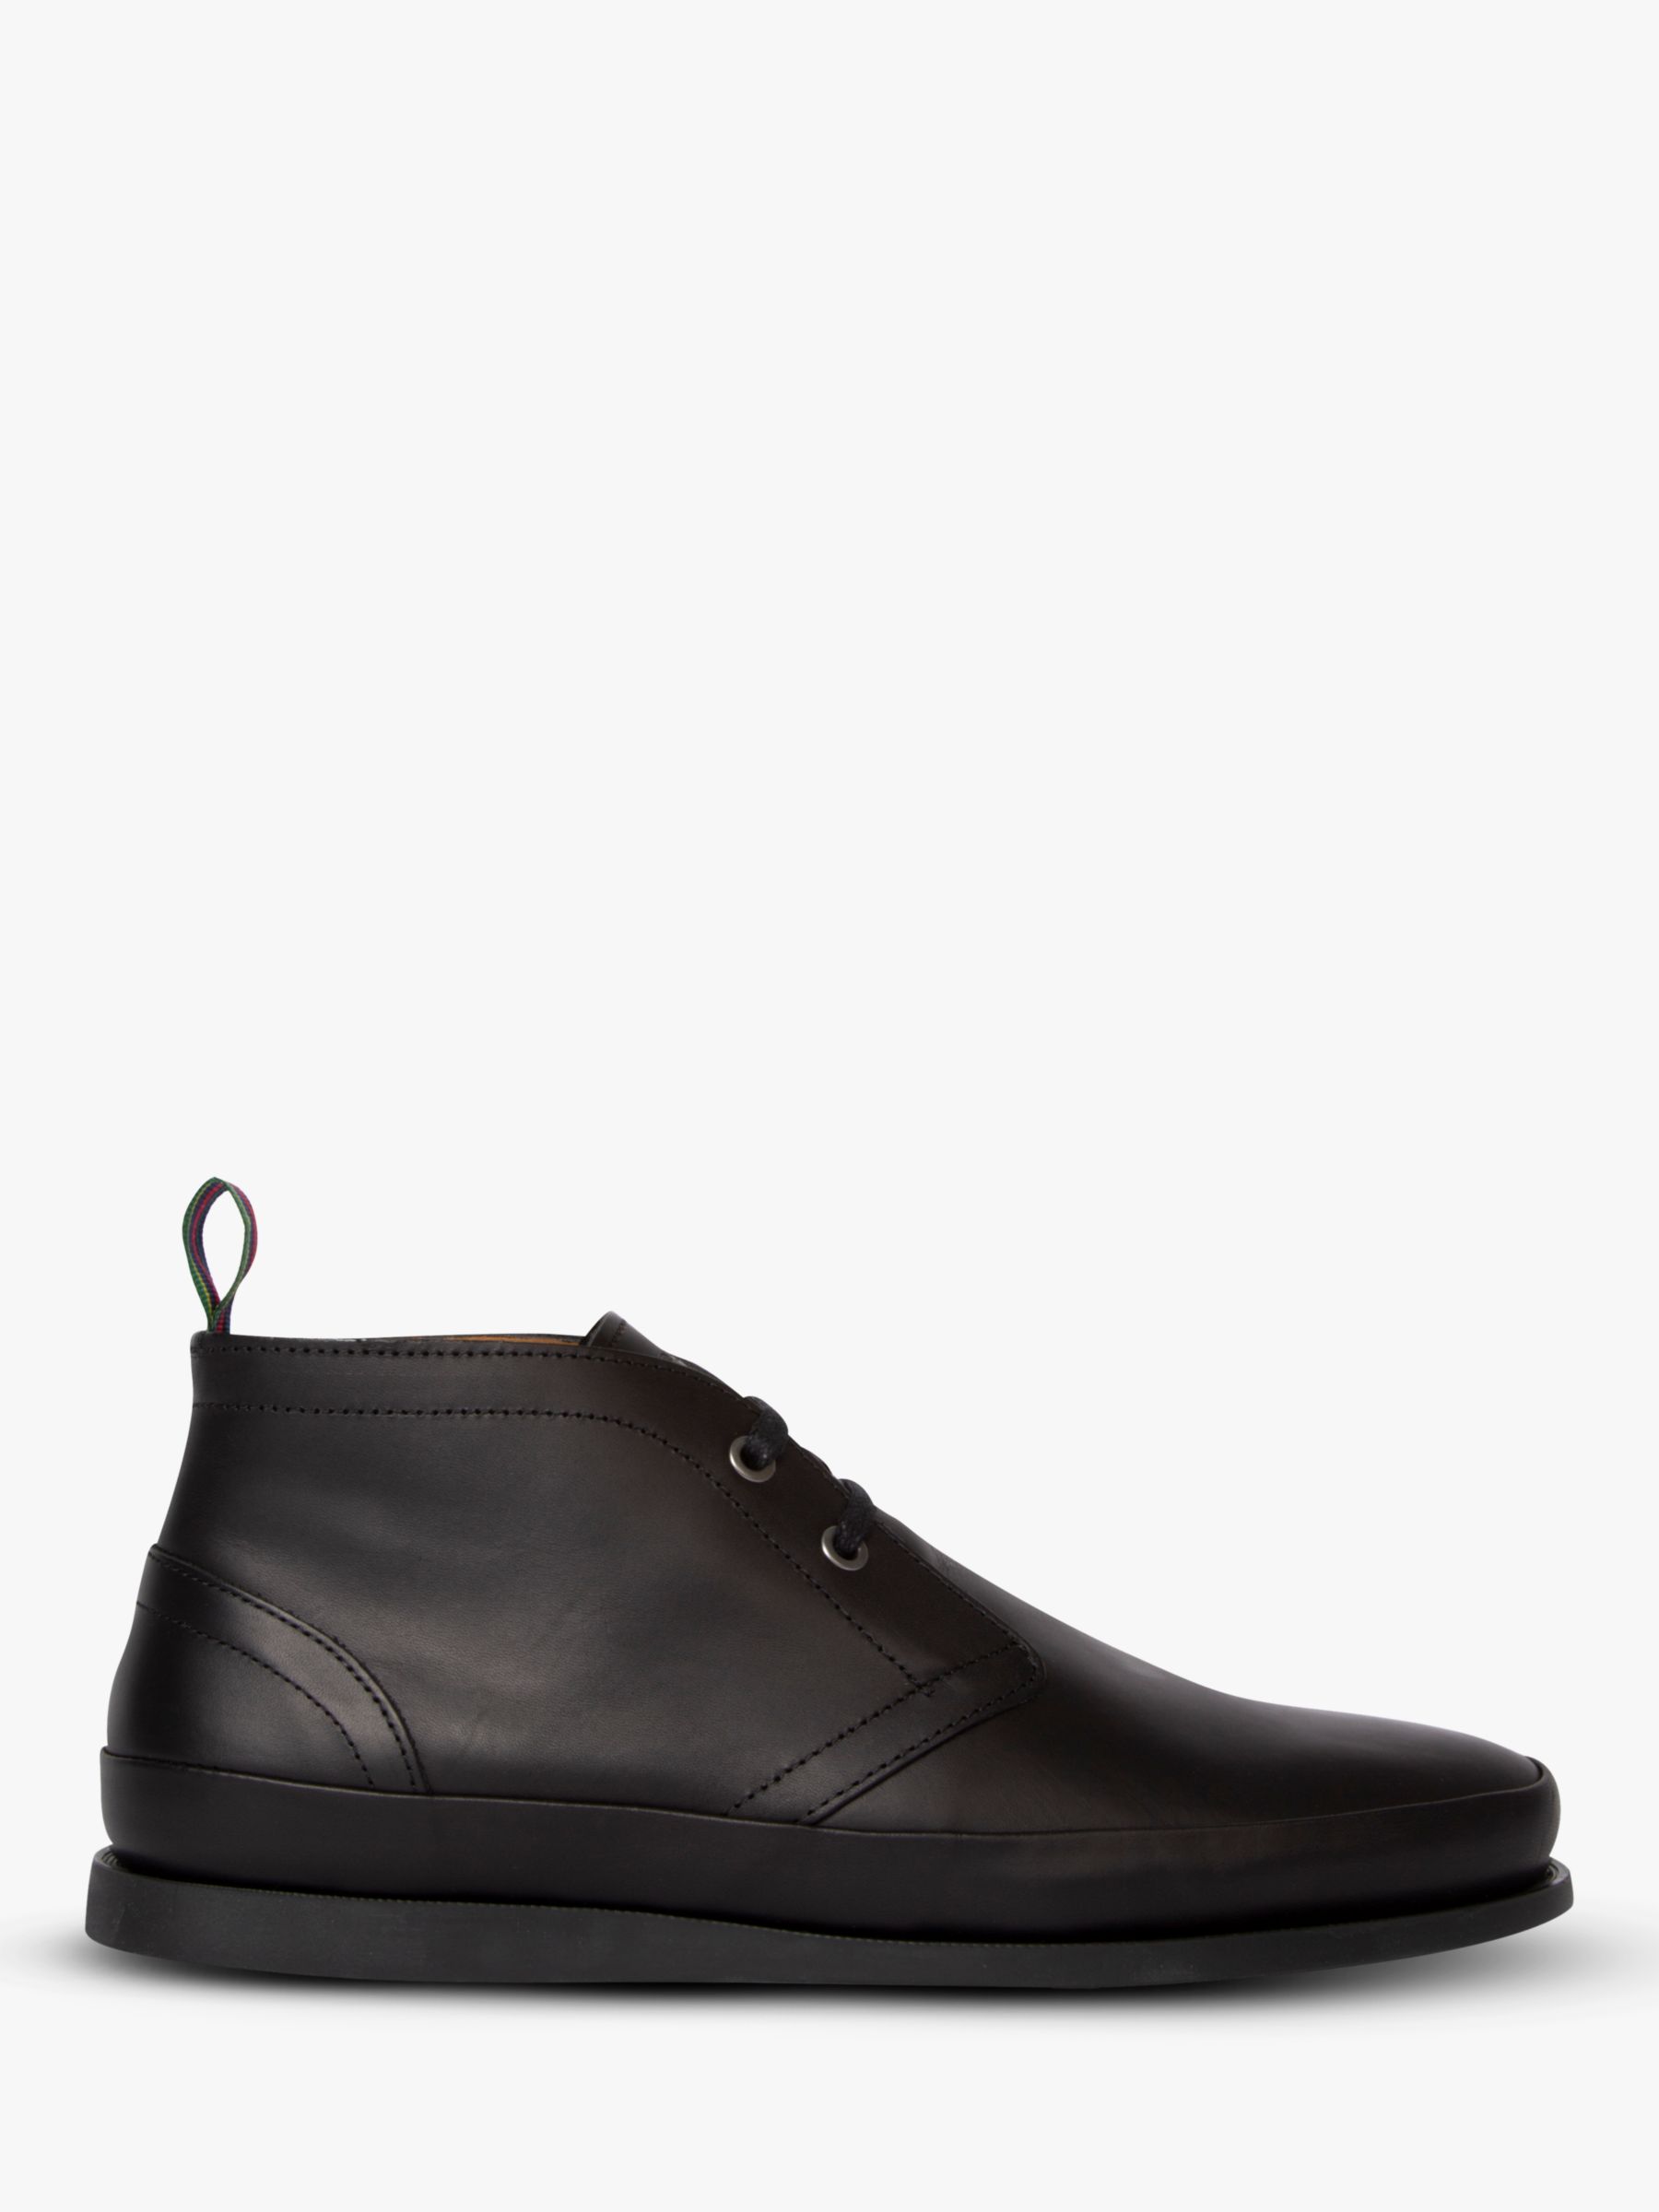 paul smith cleon boots black